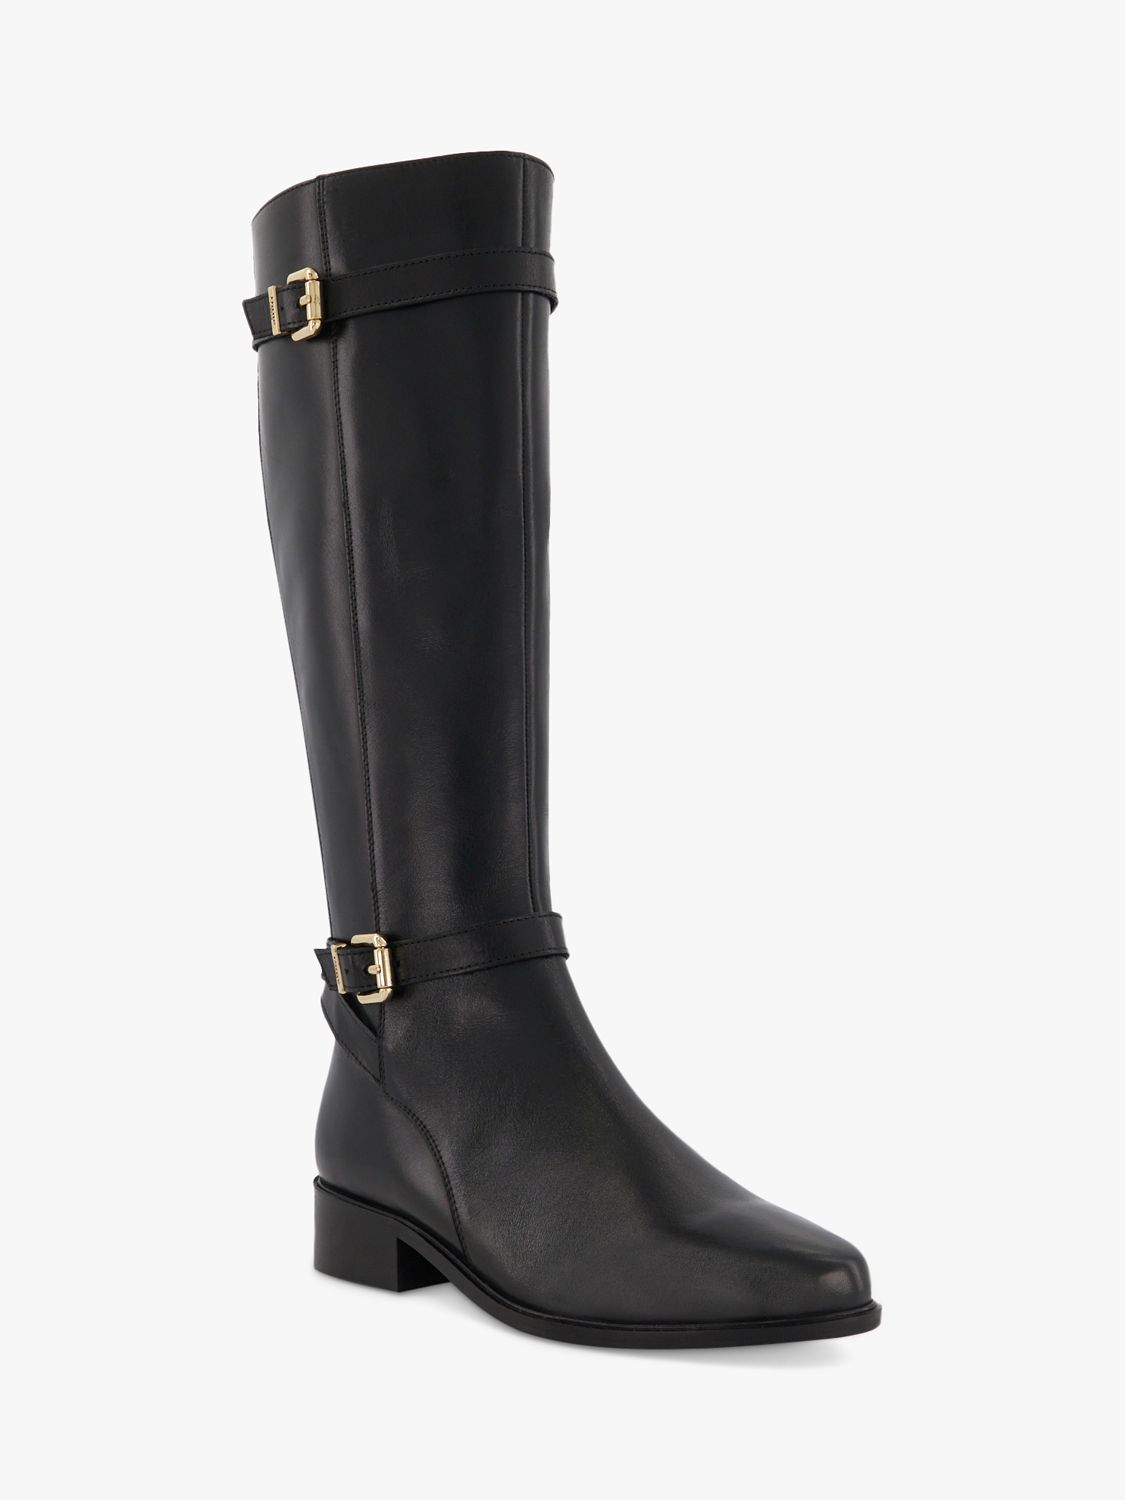 Dune Wide Fit Tepi Leather Trim High Boot, Black Leather at John Lewis ...